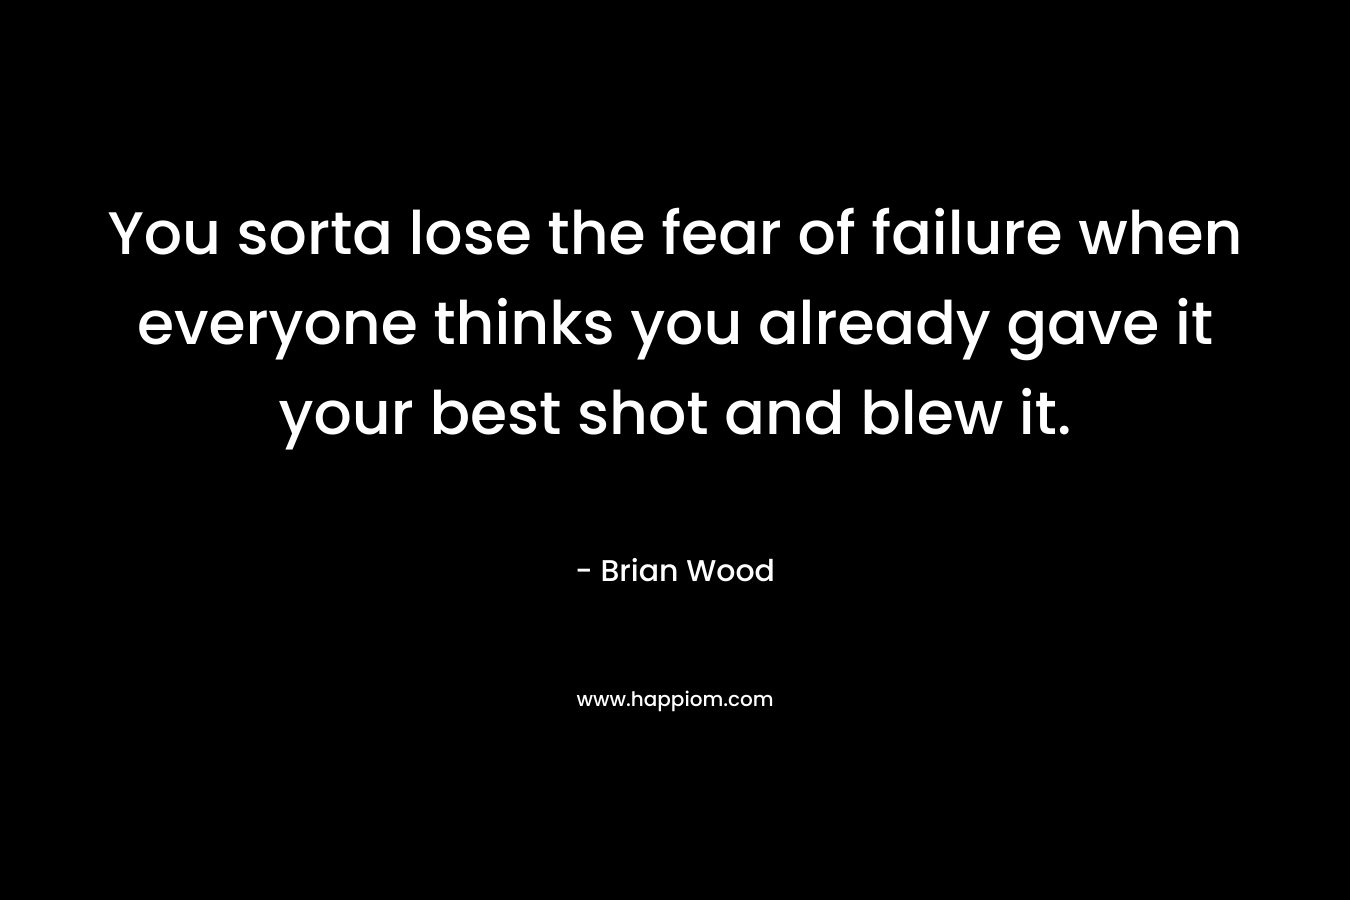 You sorta lose the fear of failure when everyone thinks you already gave it your best shot and blew it. – Brian Wood